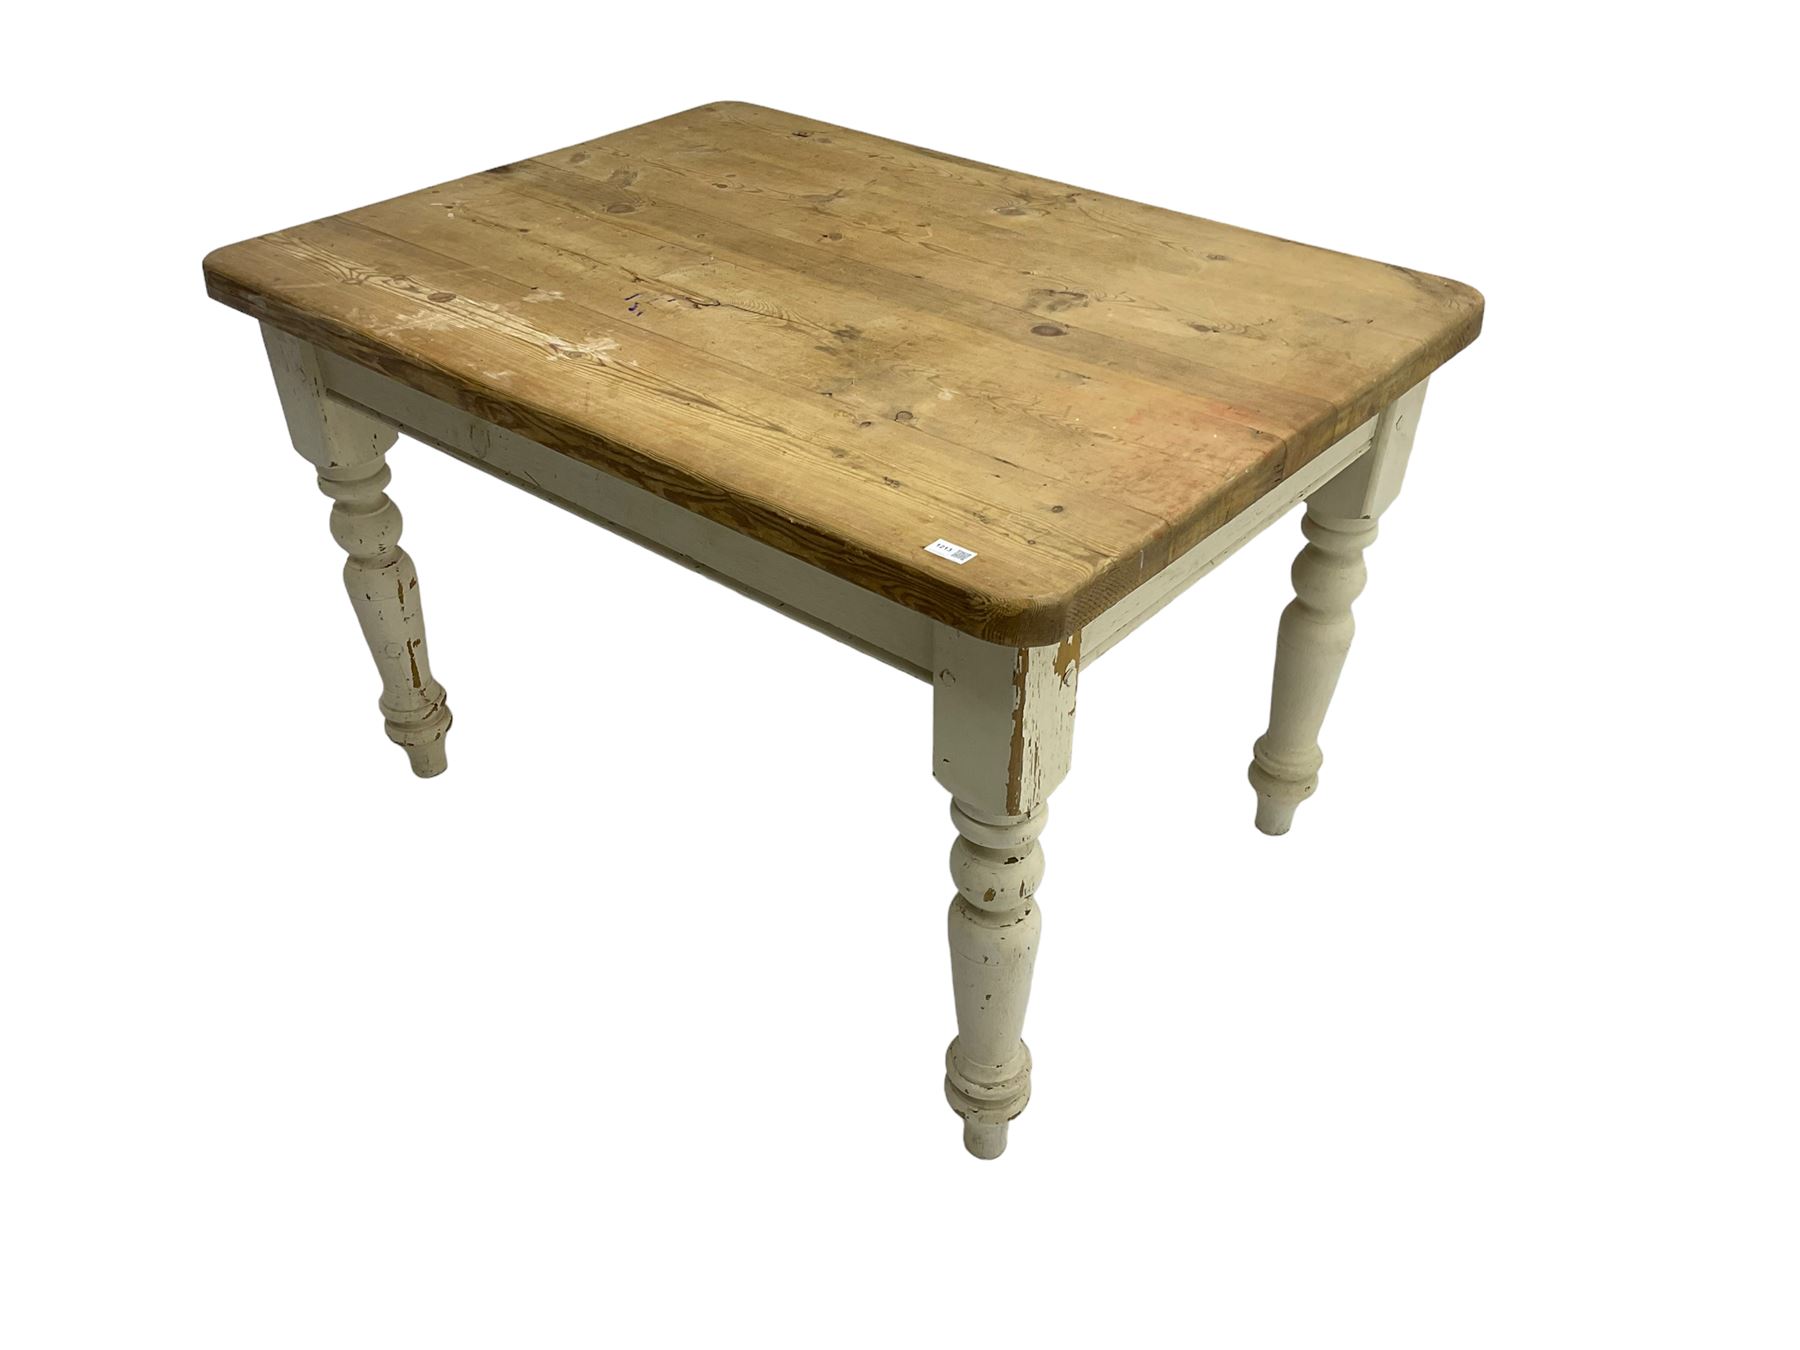 Traditional pine kitchen table with white painted base - Image 7 of 7